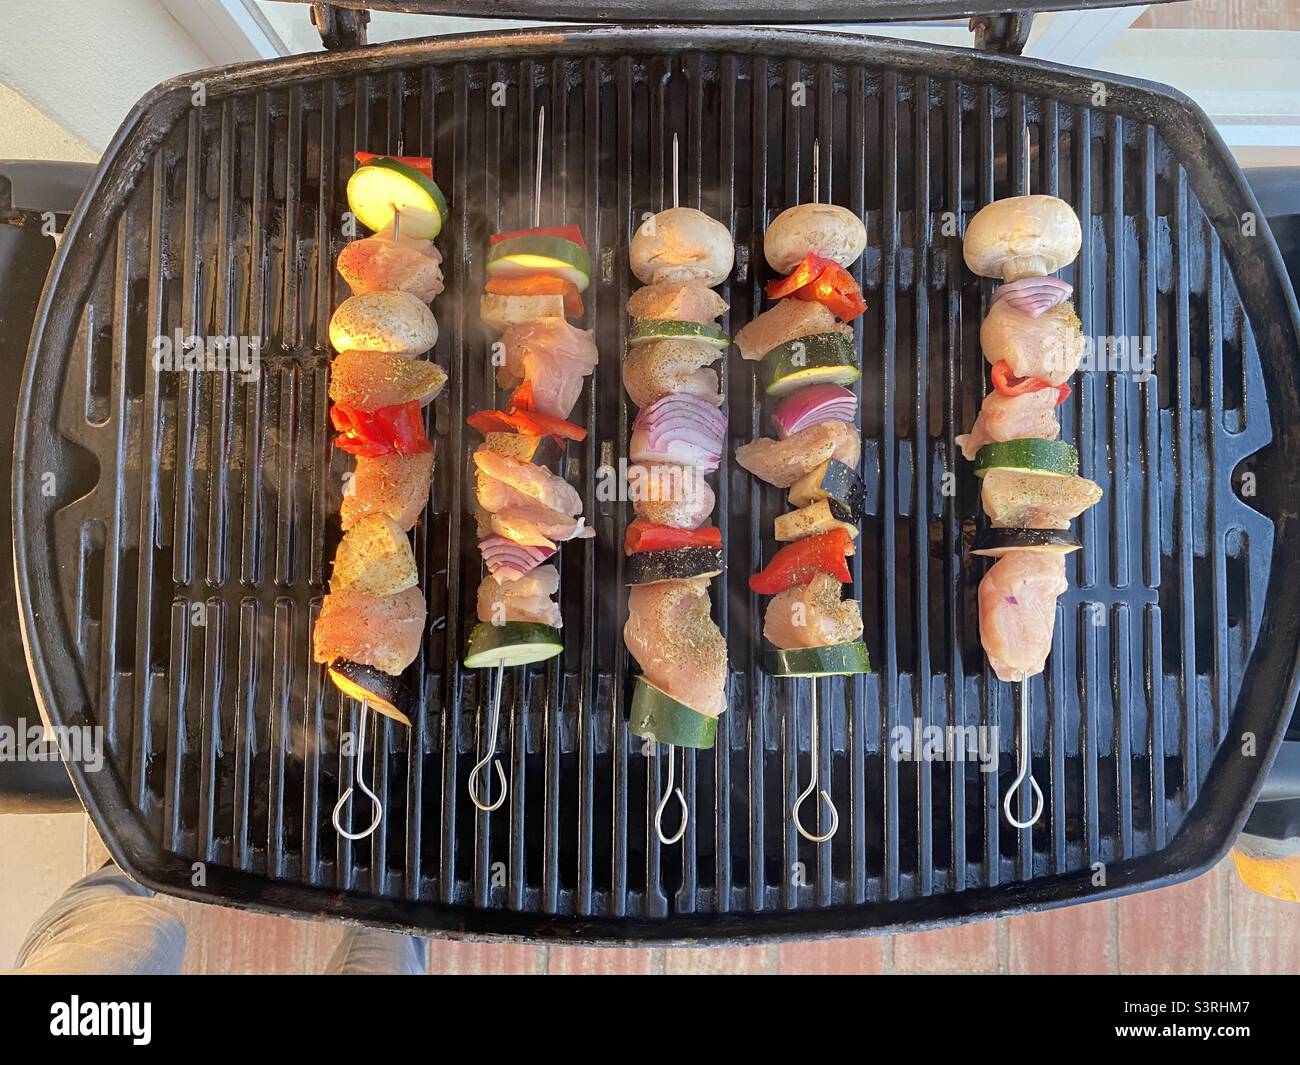 Chicken and vegetable kebabs cooking on a gas BBQ Stock Photo